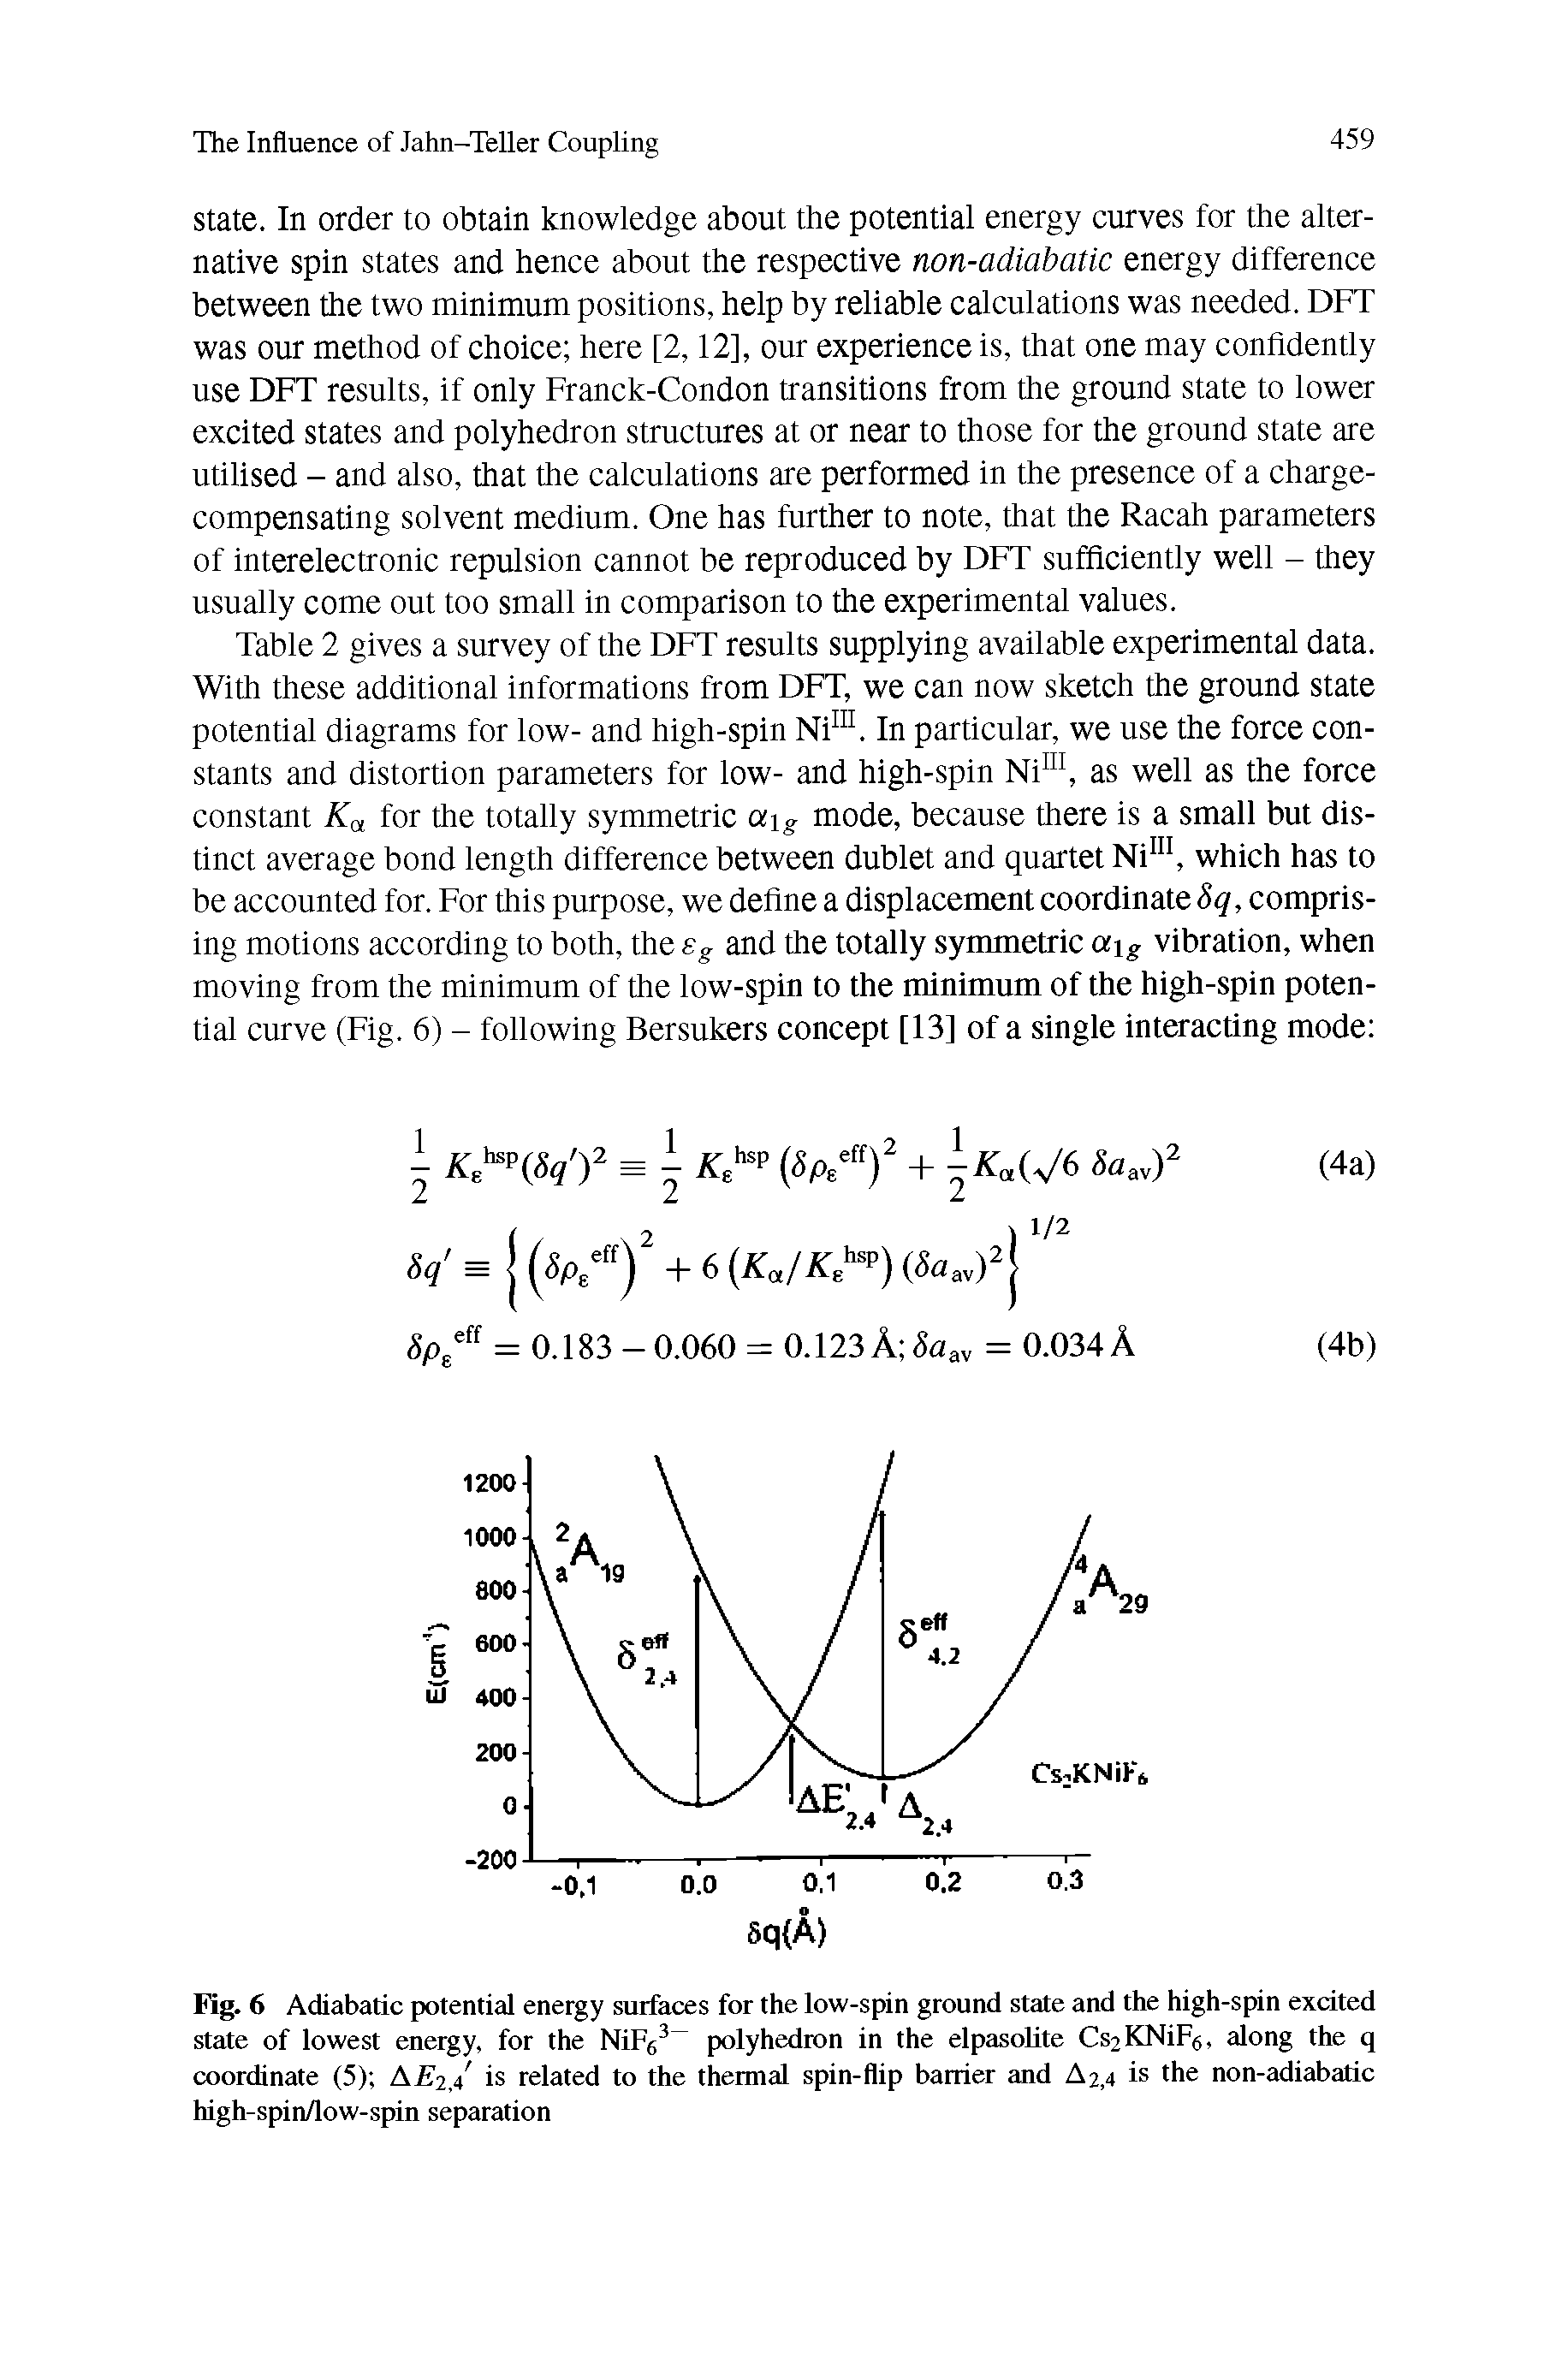 Fig. 6 Adiabatic potential energy surfaces for the low-spin ground state and the high-spin excited state of lowest energy, for the NiFs polyhedron in the elpasolite Cs2KNiF5, along the q coordinate (5) Aii 2,4 is related to the thermal spin-flip barrier and A2,4 is the non-adiabatic high-spin/low-spin separation...